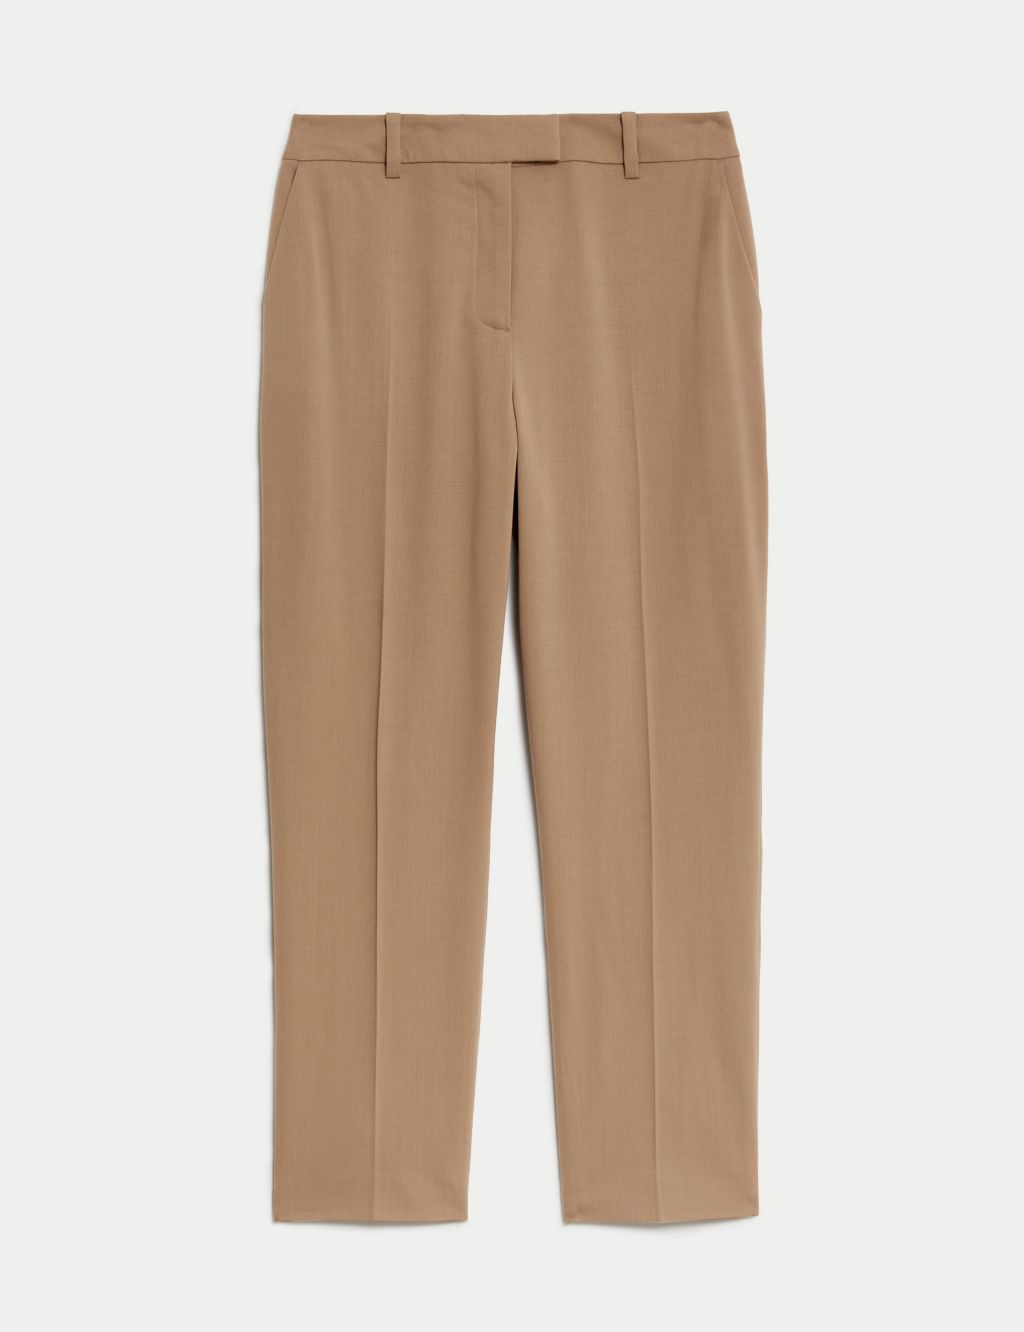 Wool Rich Straight Leg Cropped Trousers image 2